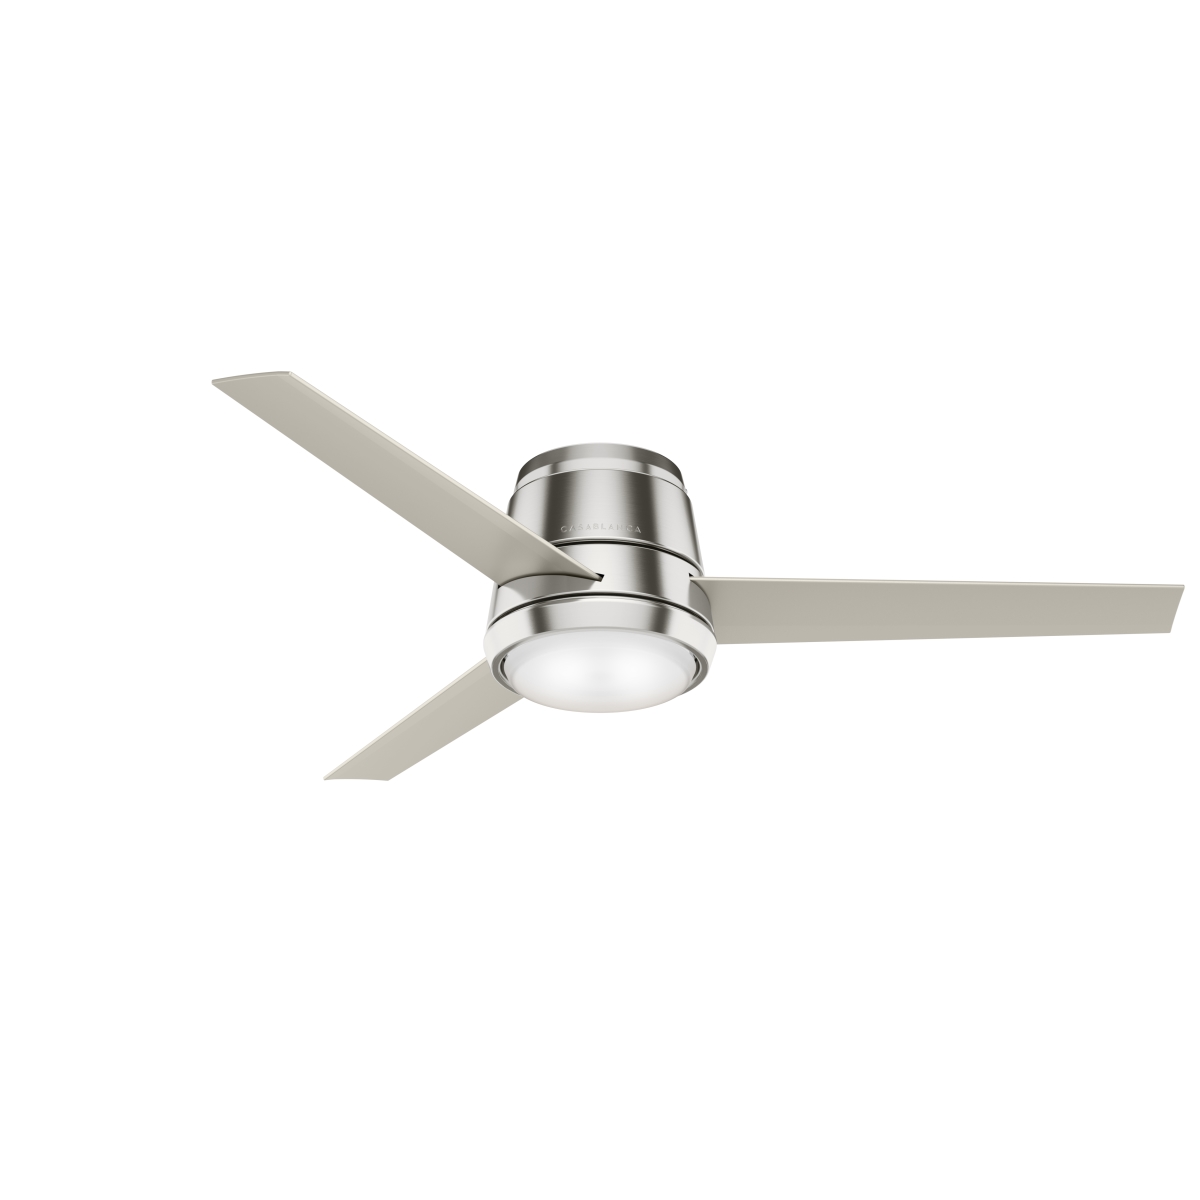 Picture of Casablanca 59573 54 in. Commodus Brushed Nickel Low Profile Ceiling Fan with LED Light Kit & Wall Control